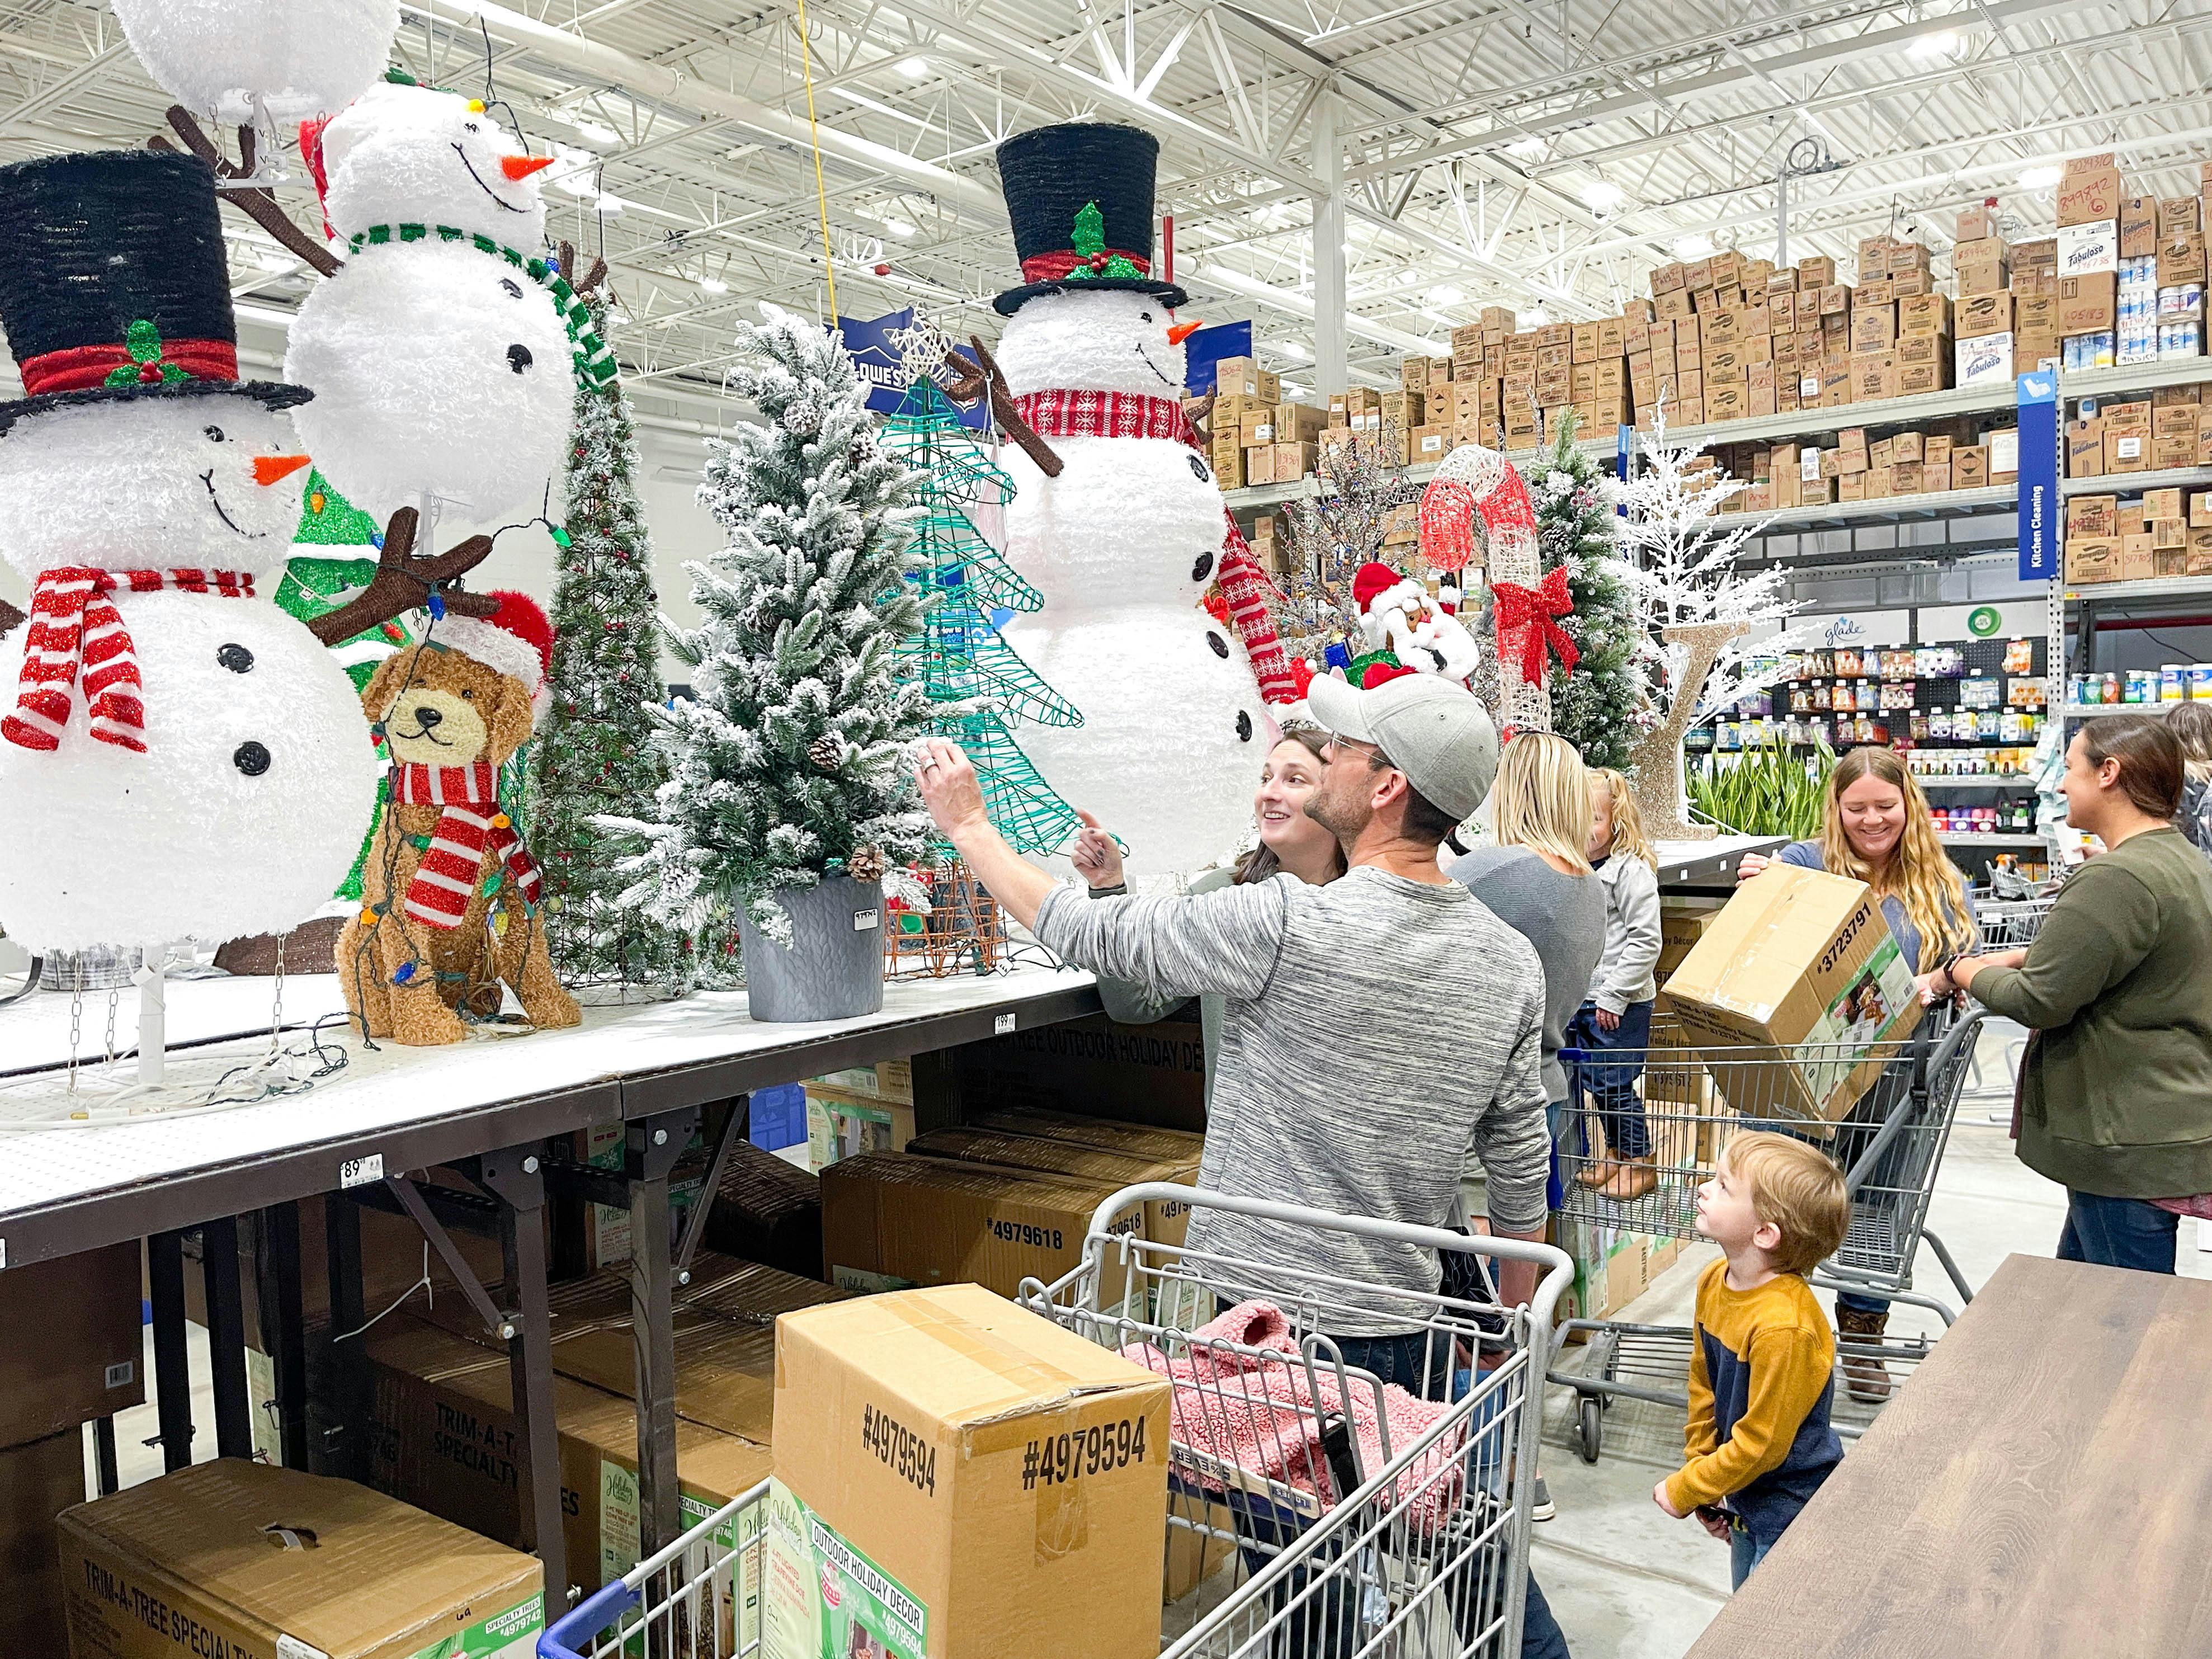 A group of people looking at Christmas decor in Lowes.